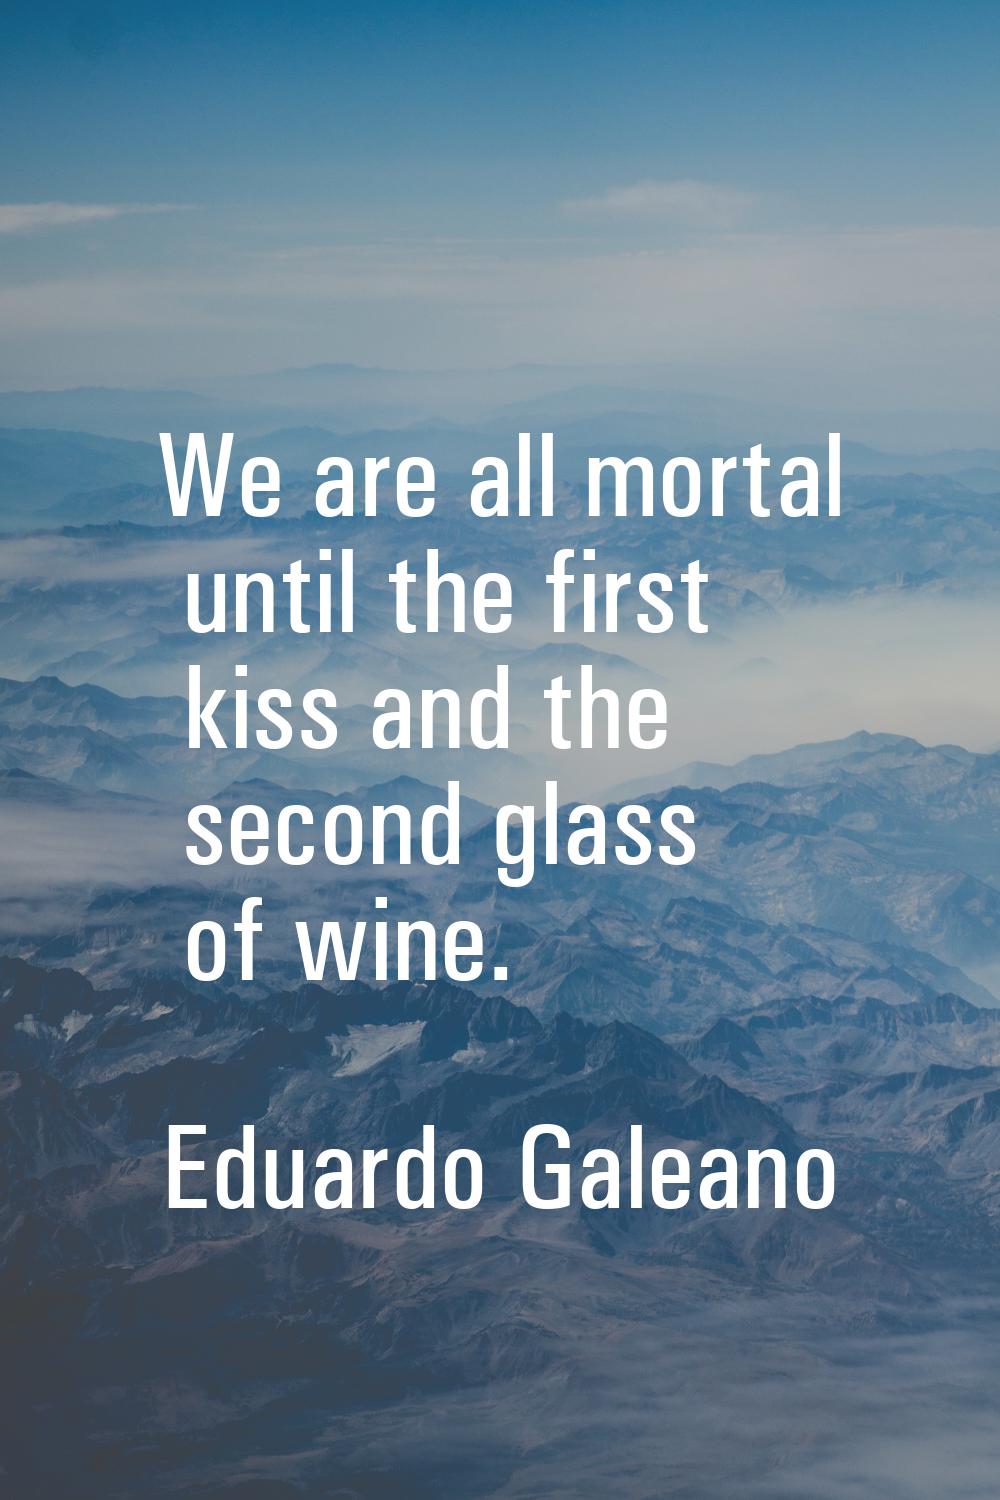 We are all mortal until the first kiss and the second glass of wine.